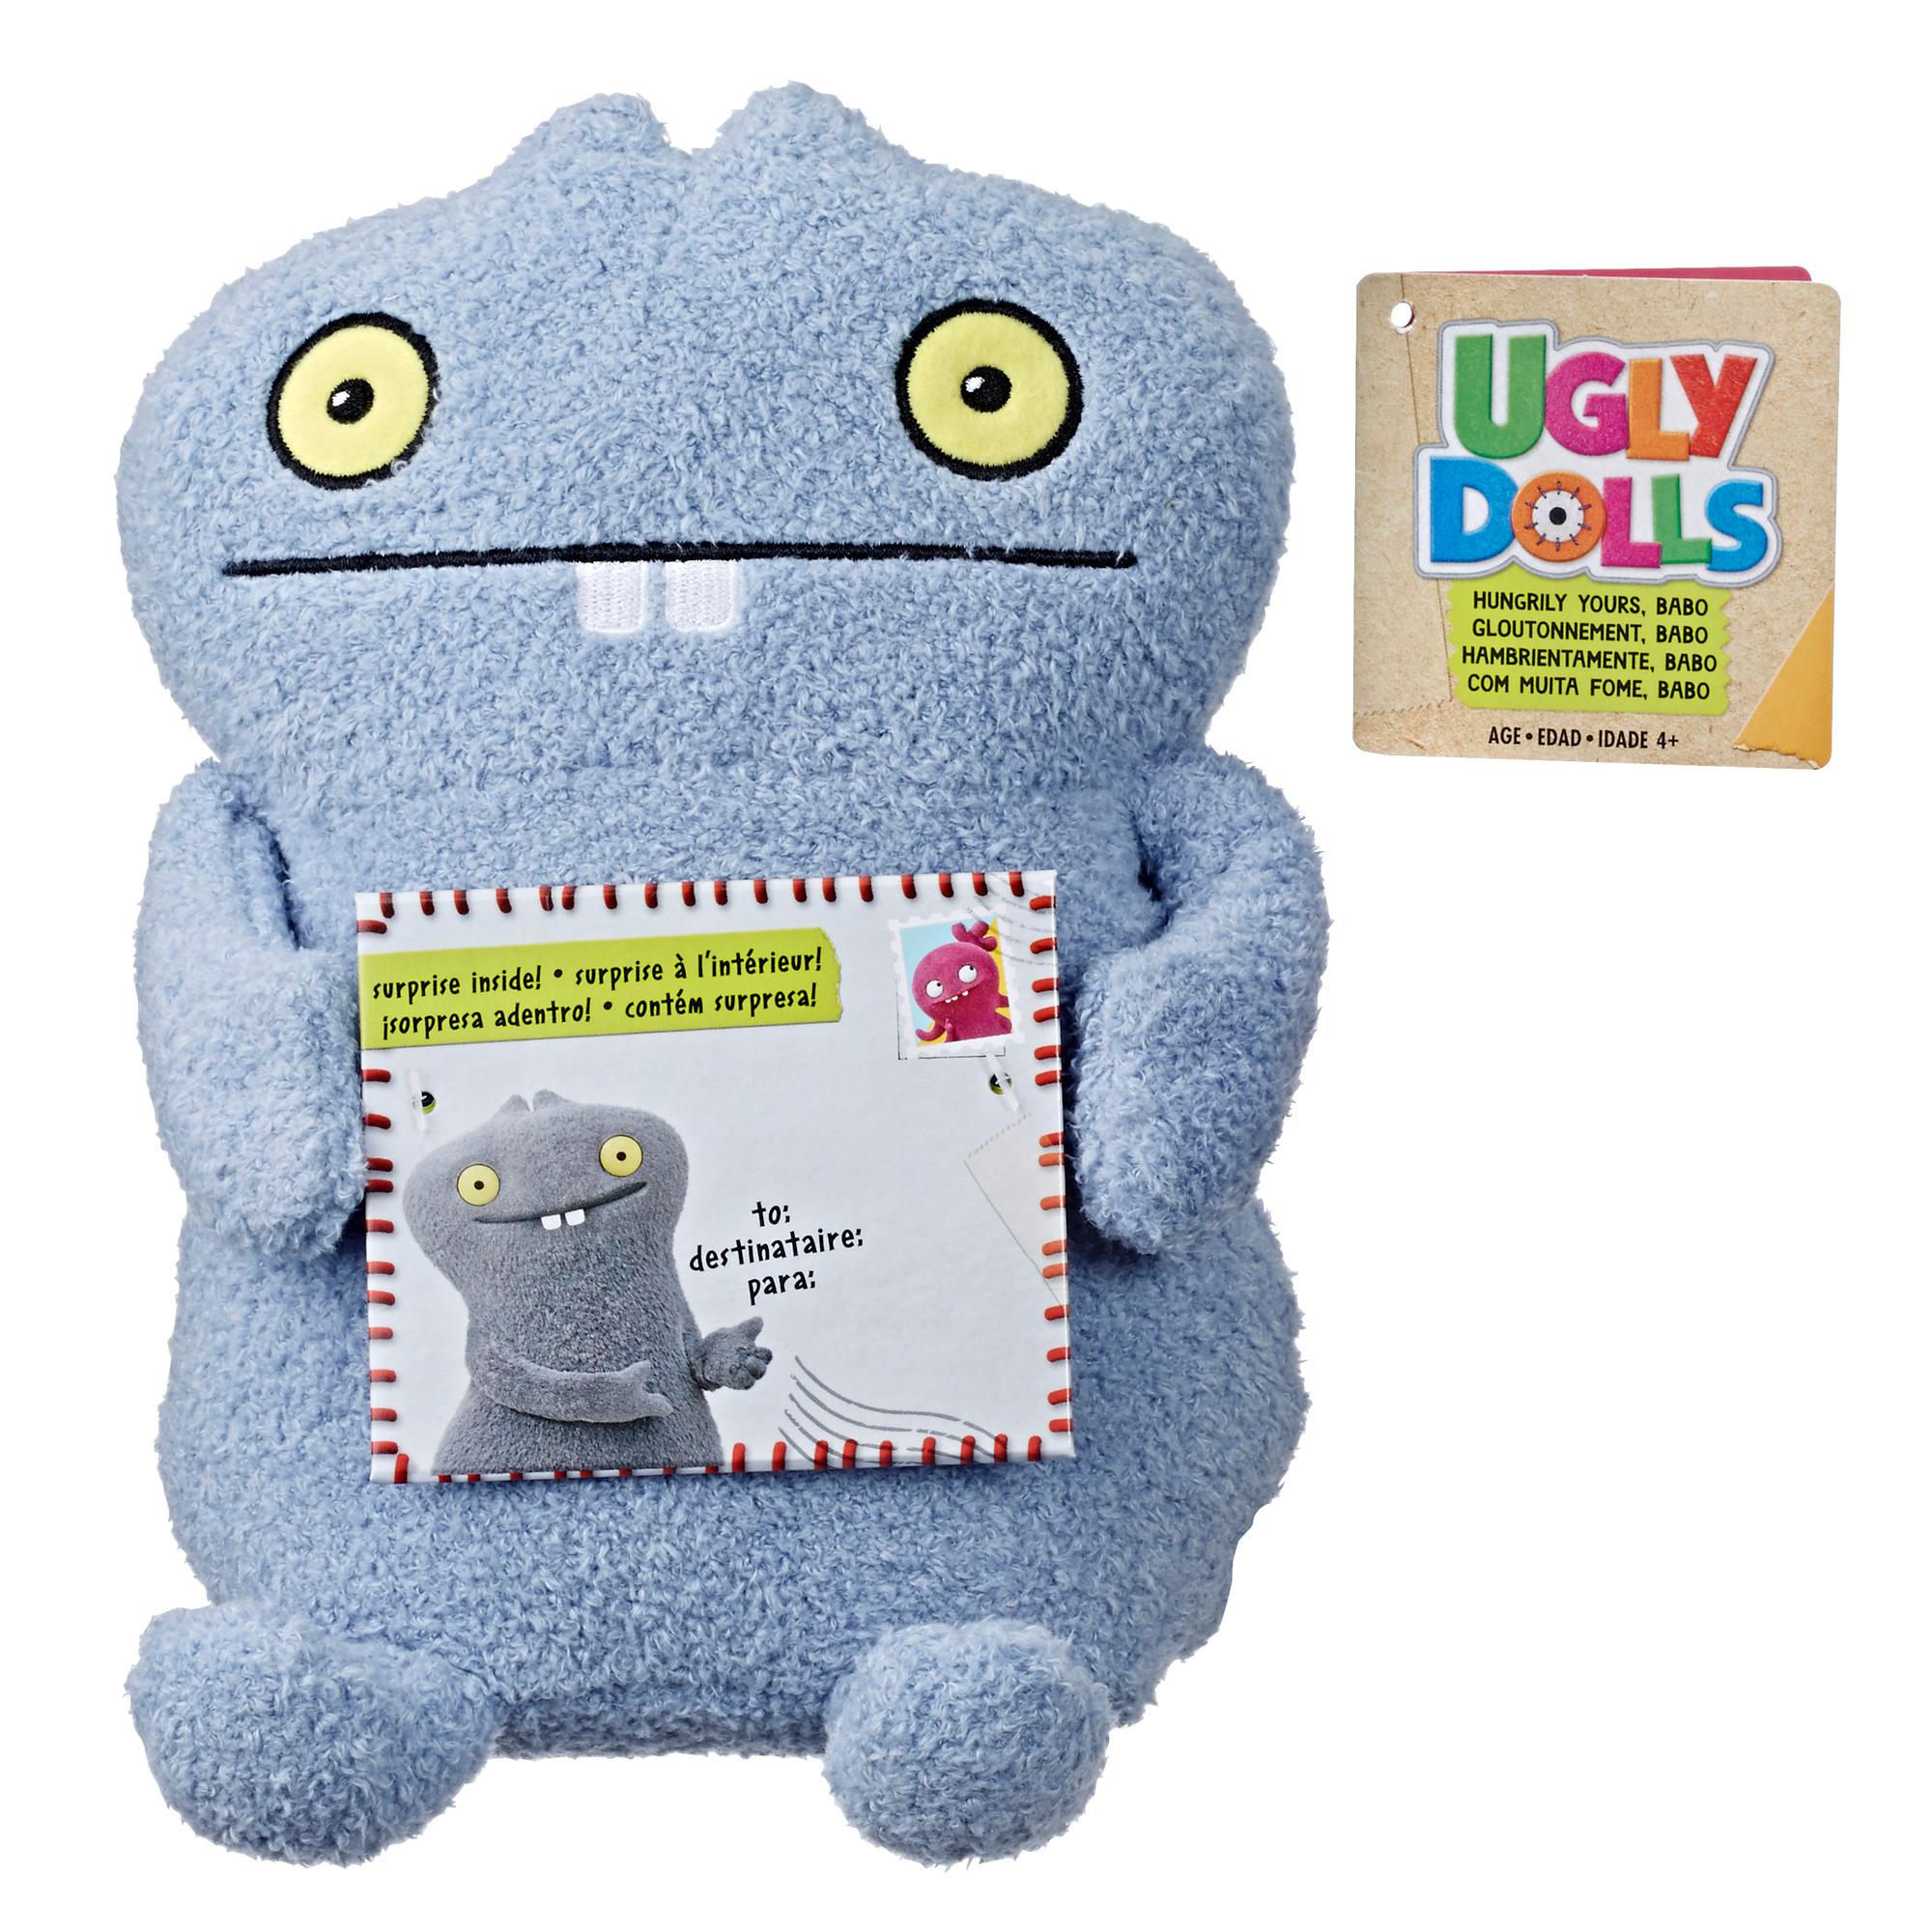 Details about   UglyDolls Hungrily Yours Babo Stuffed Plush Toy 10 inches tall